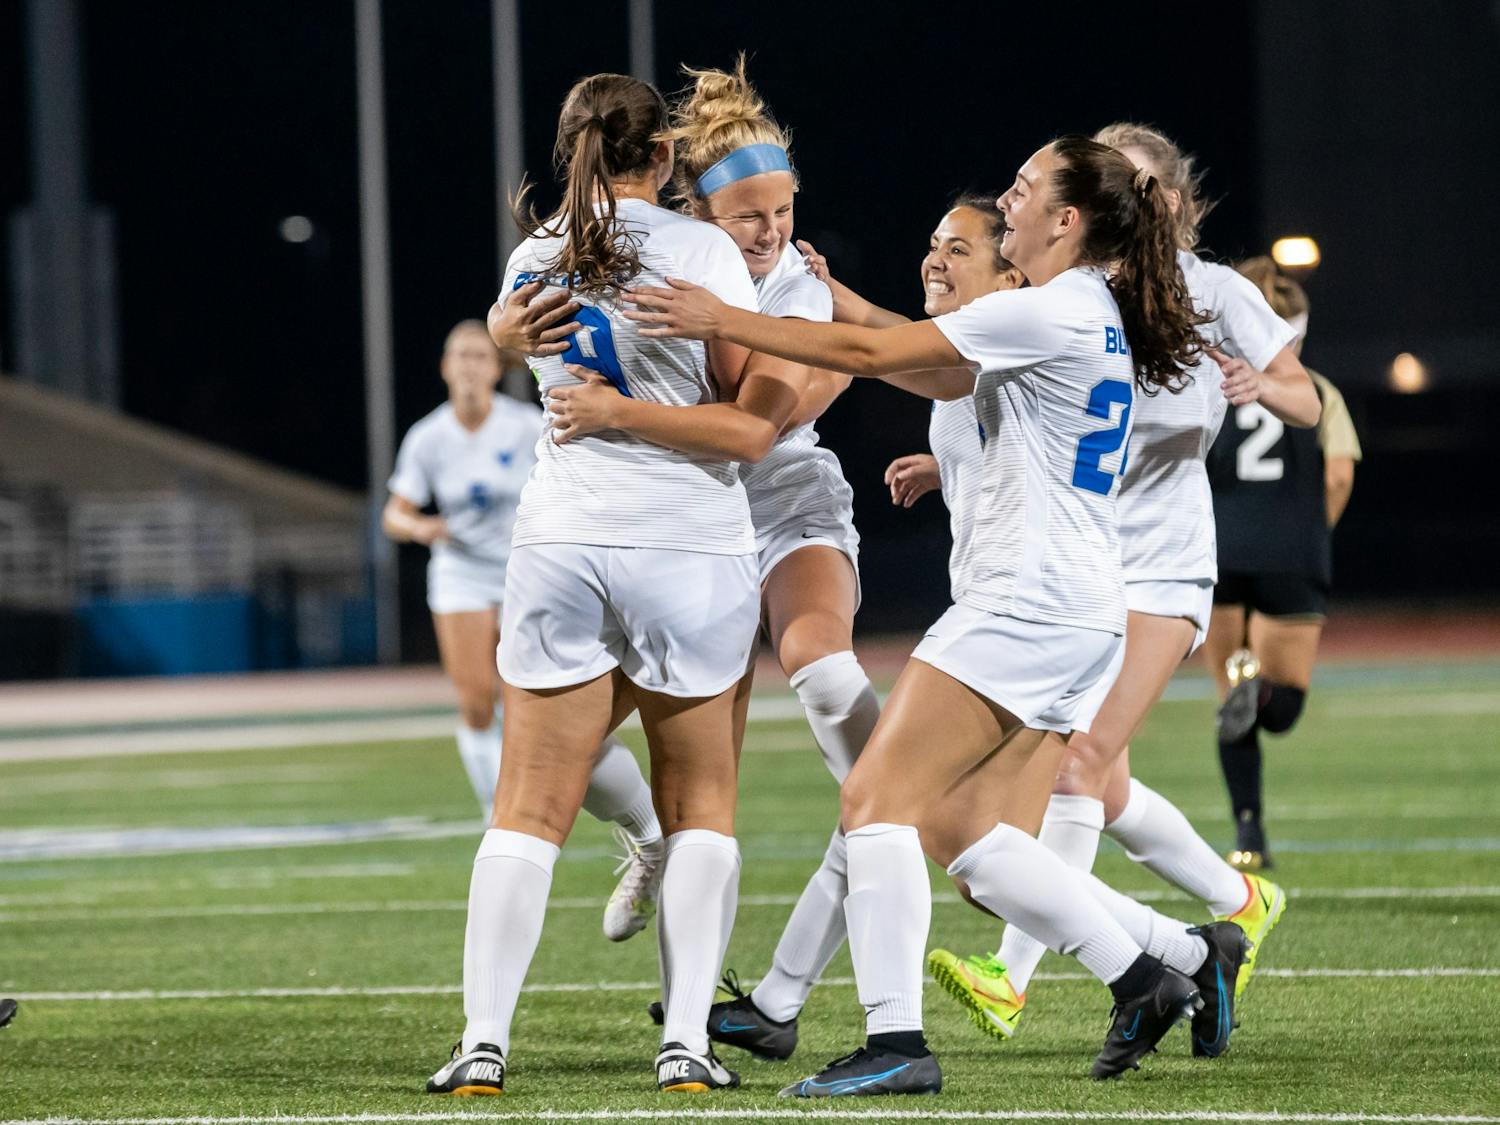 Gianna Yurchak (9), Kaya Schultz (24) and members of the women’s soccer team celebrate after scoring a goal over the weekend.